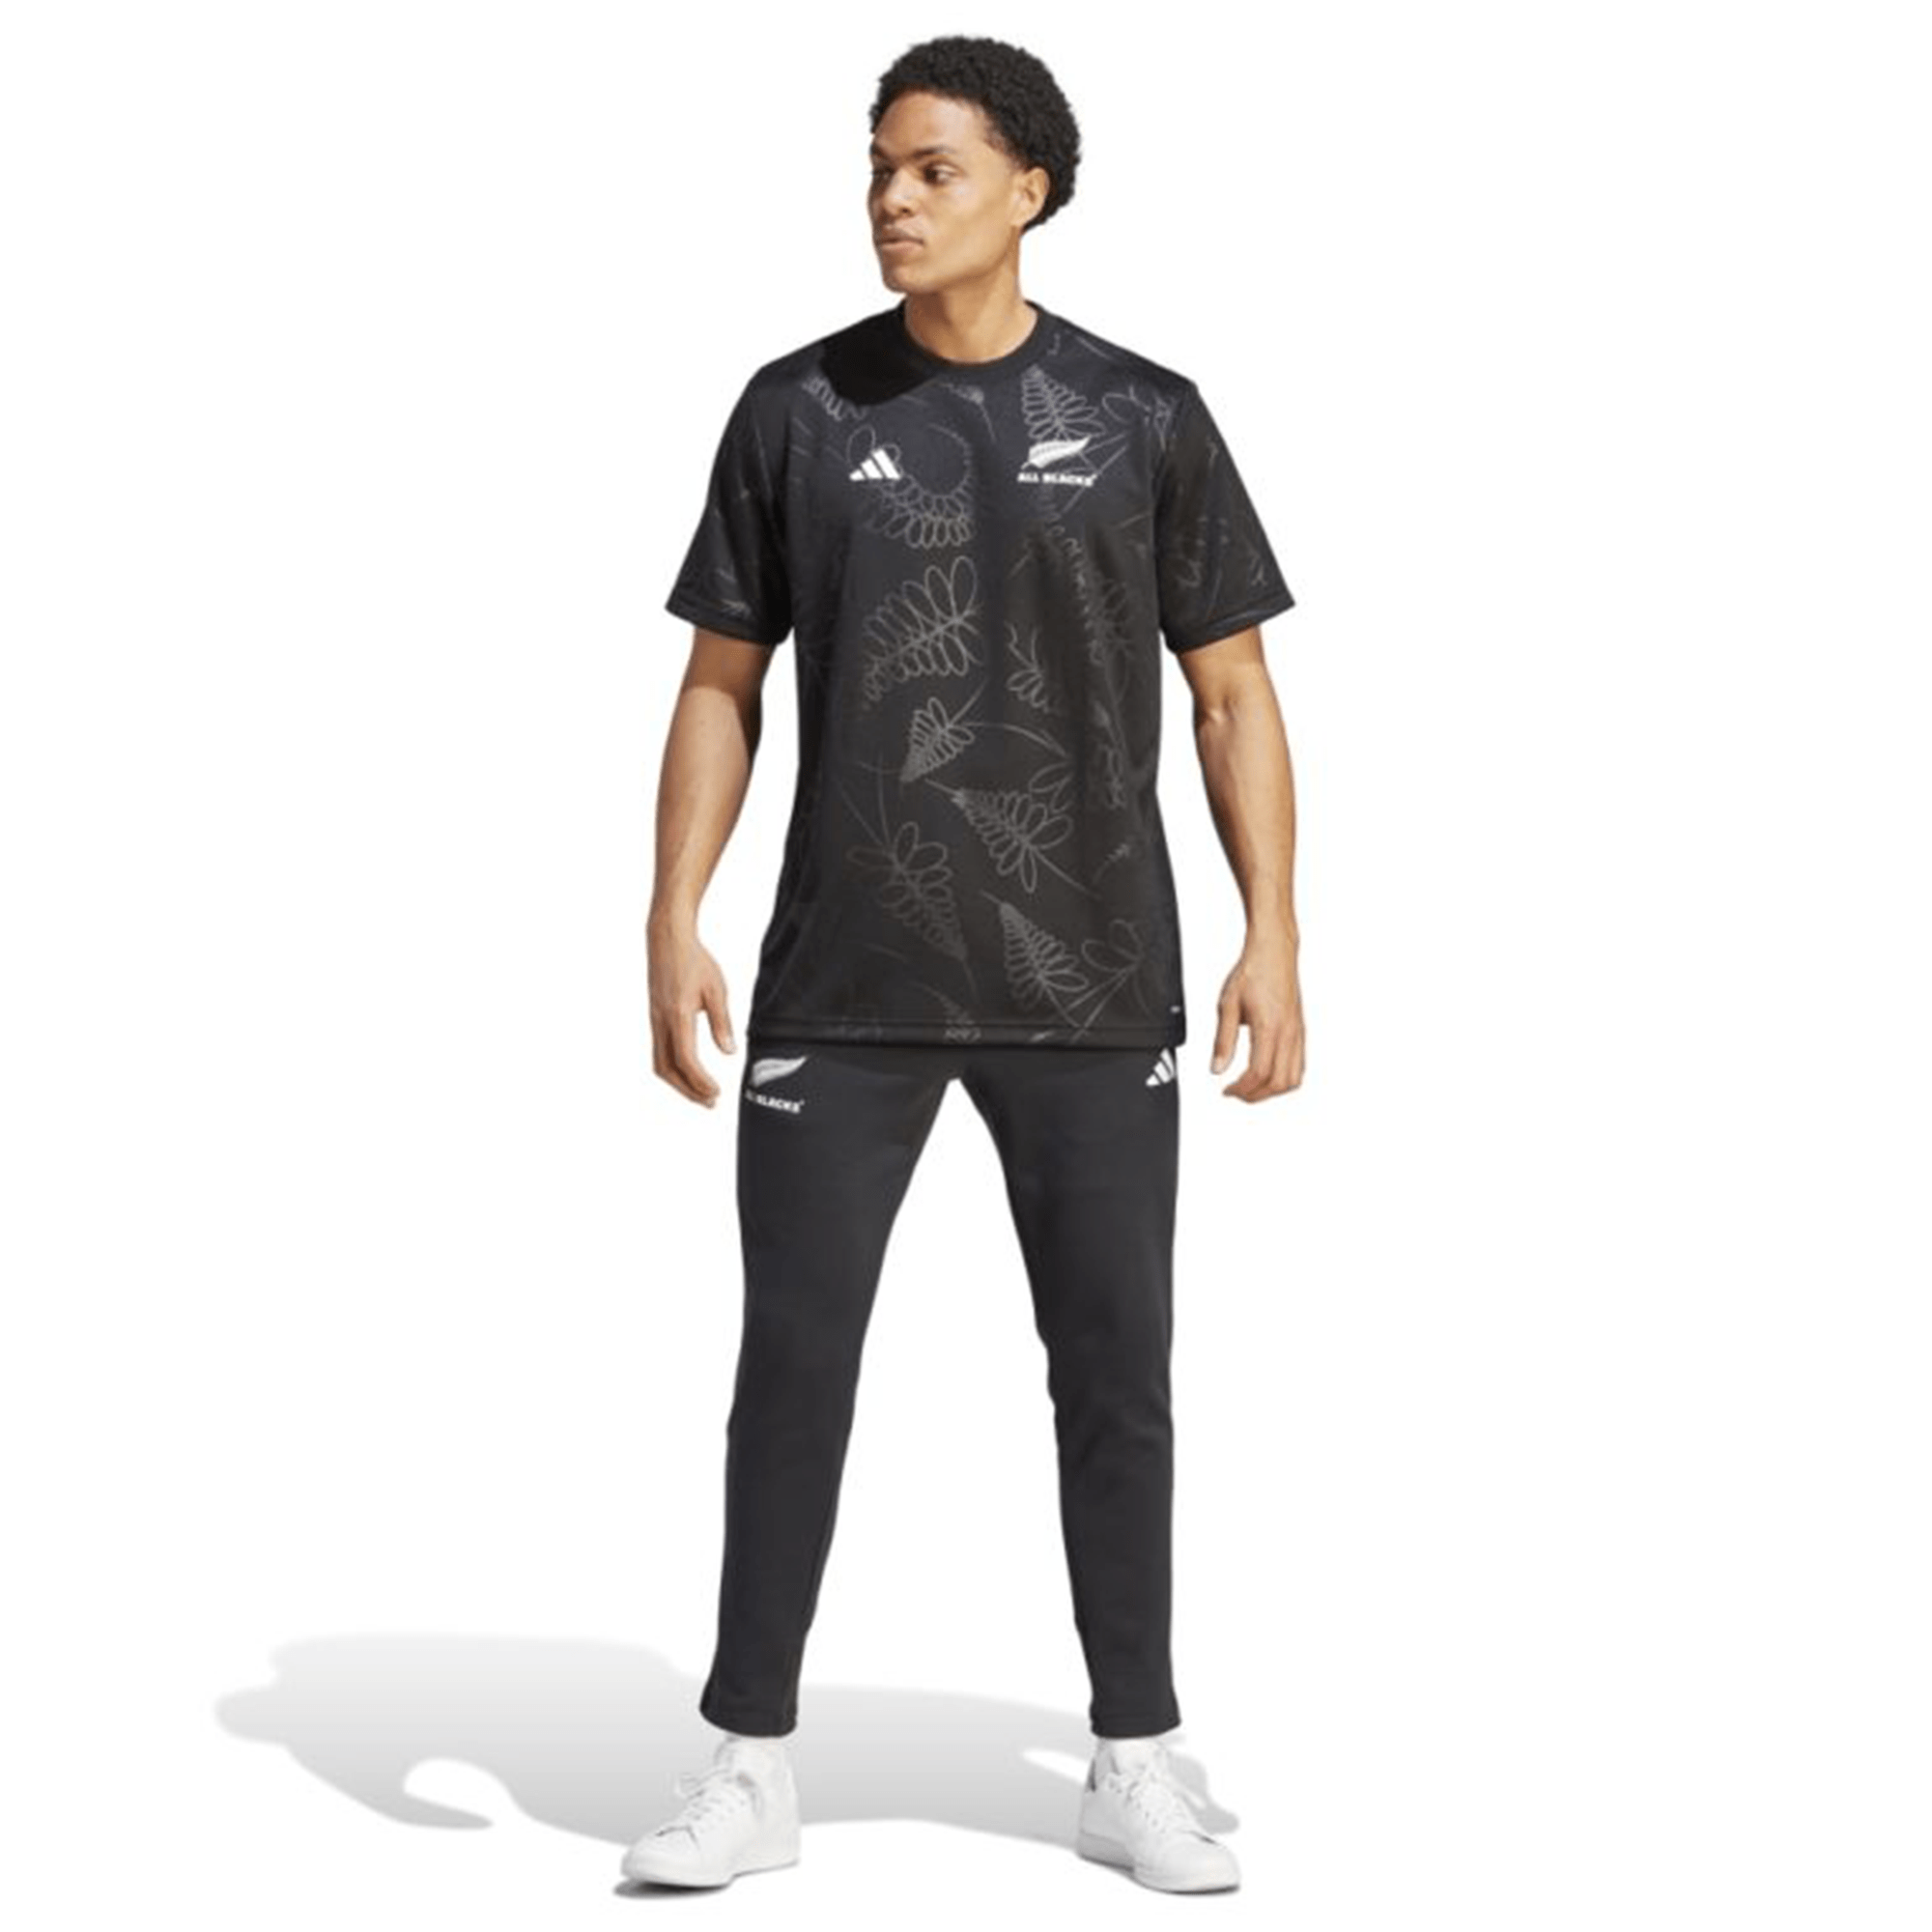 Blacks Shop Rugby World Zealand New Supporter Cup 23 All Tee World | Rugby